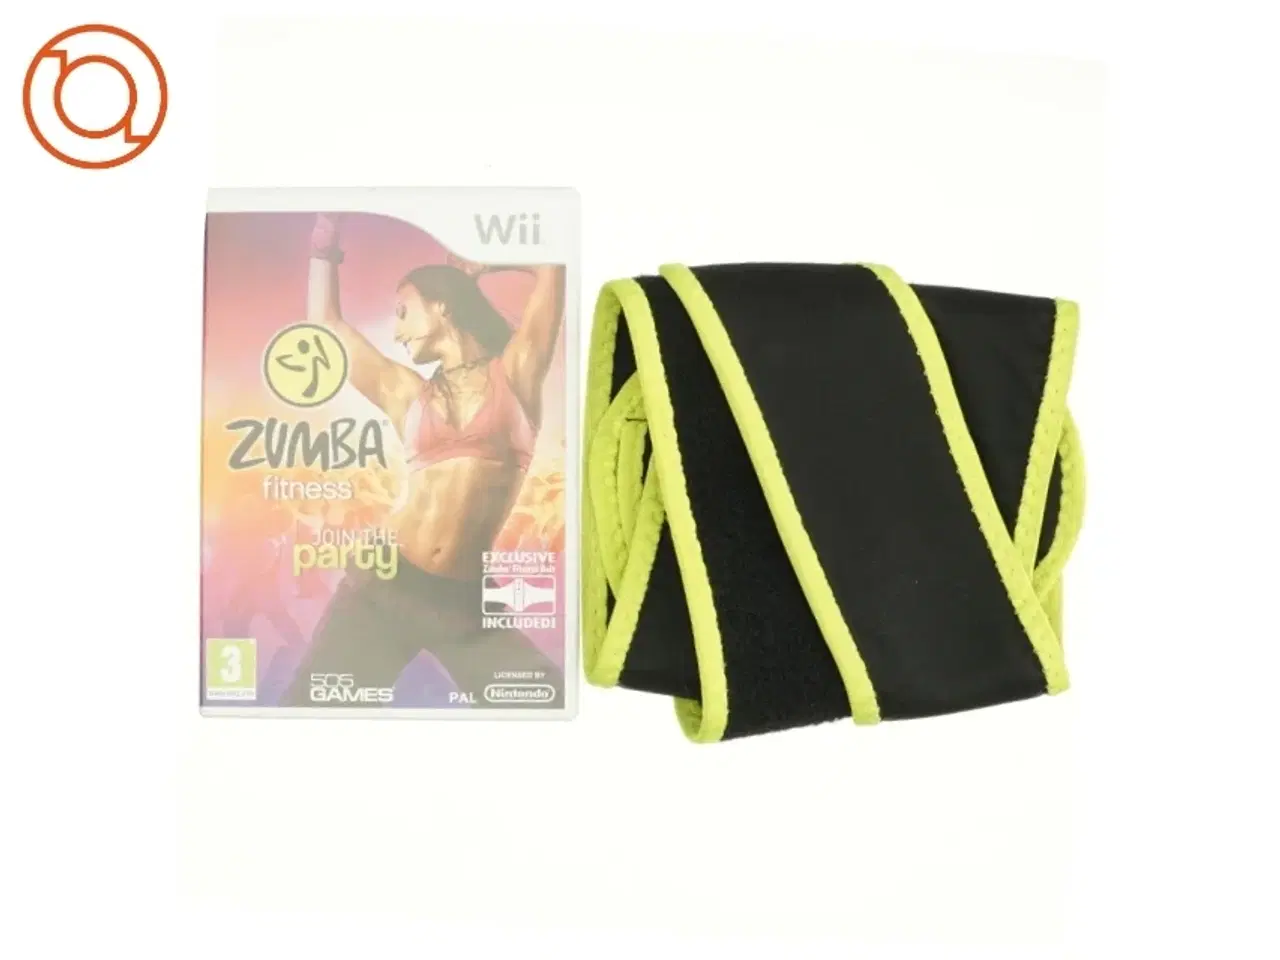 Billede 1 - ZUMBA fitness party WII fra Wii